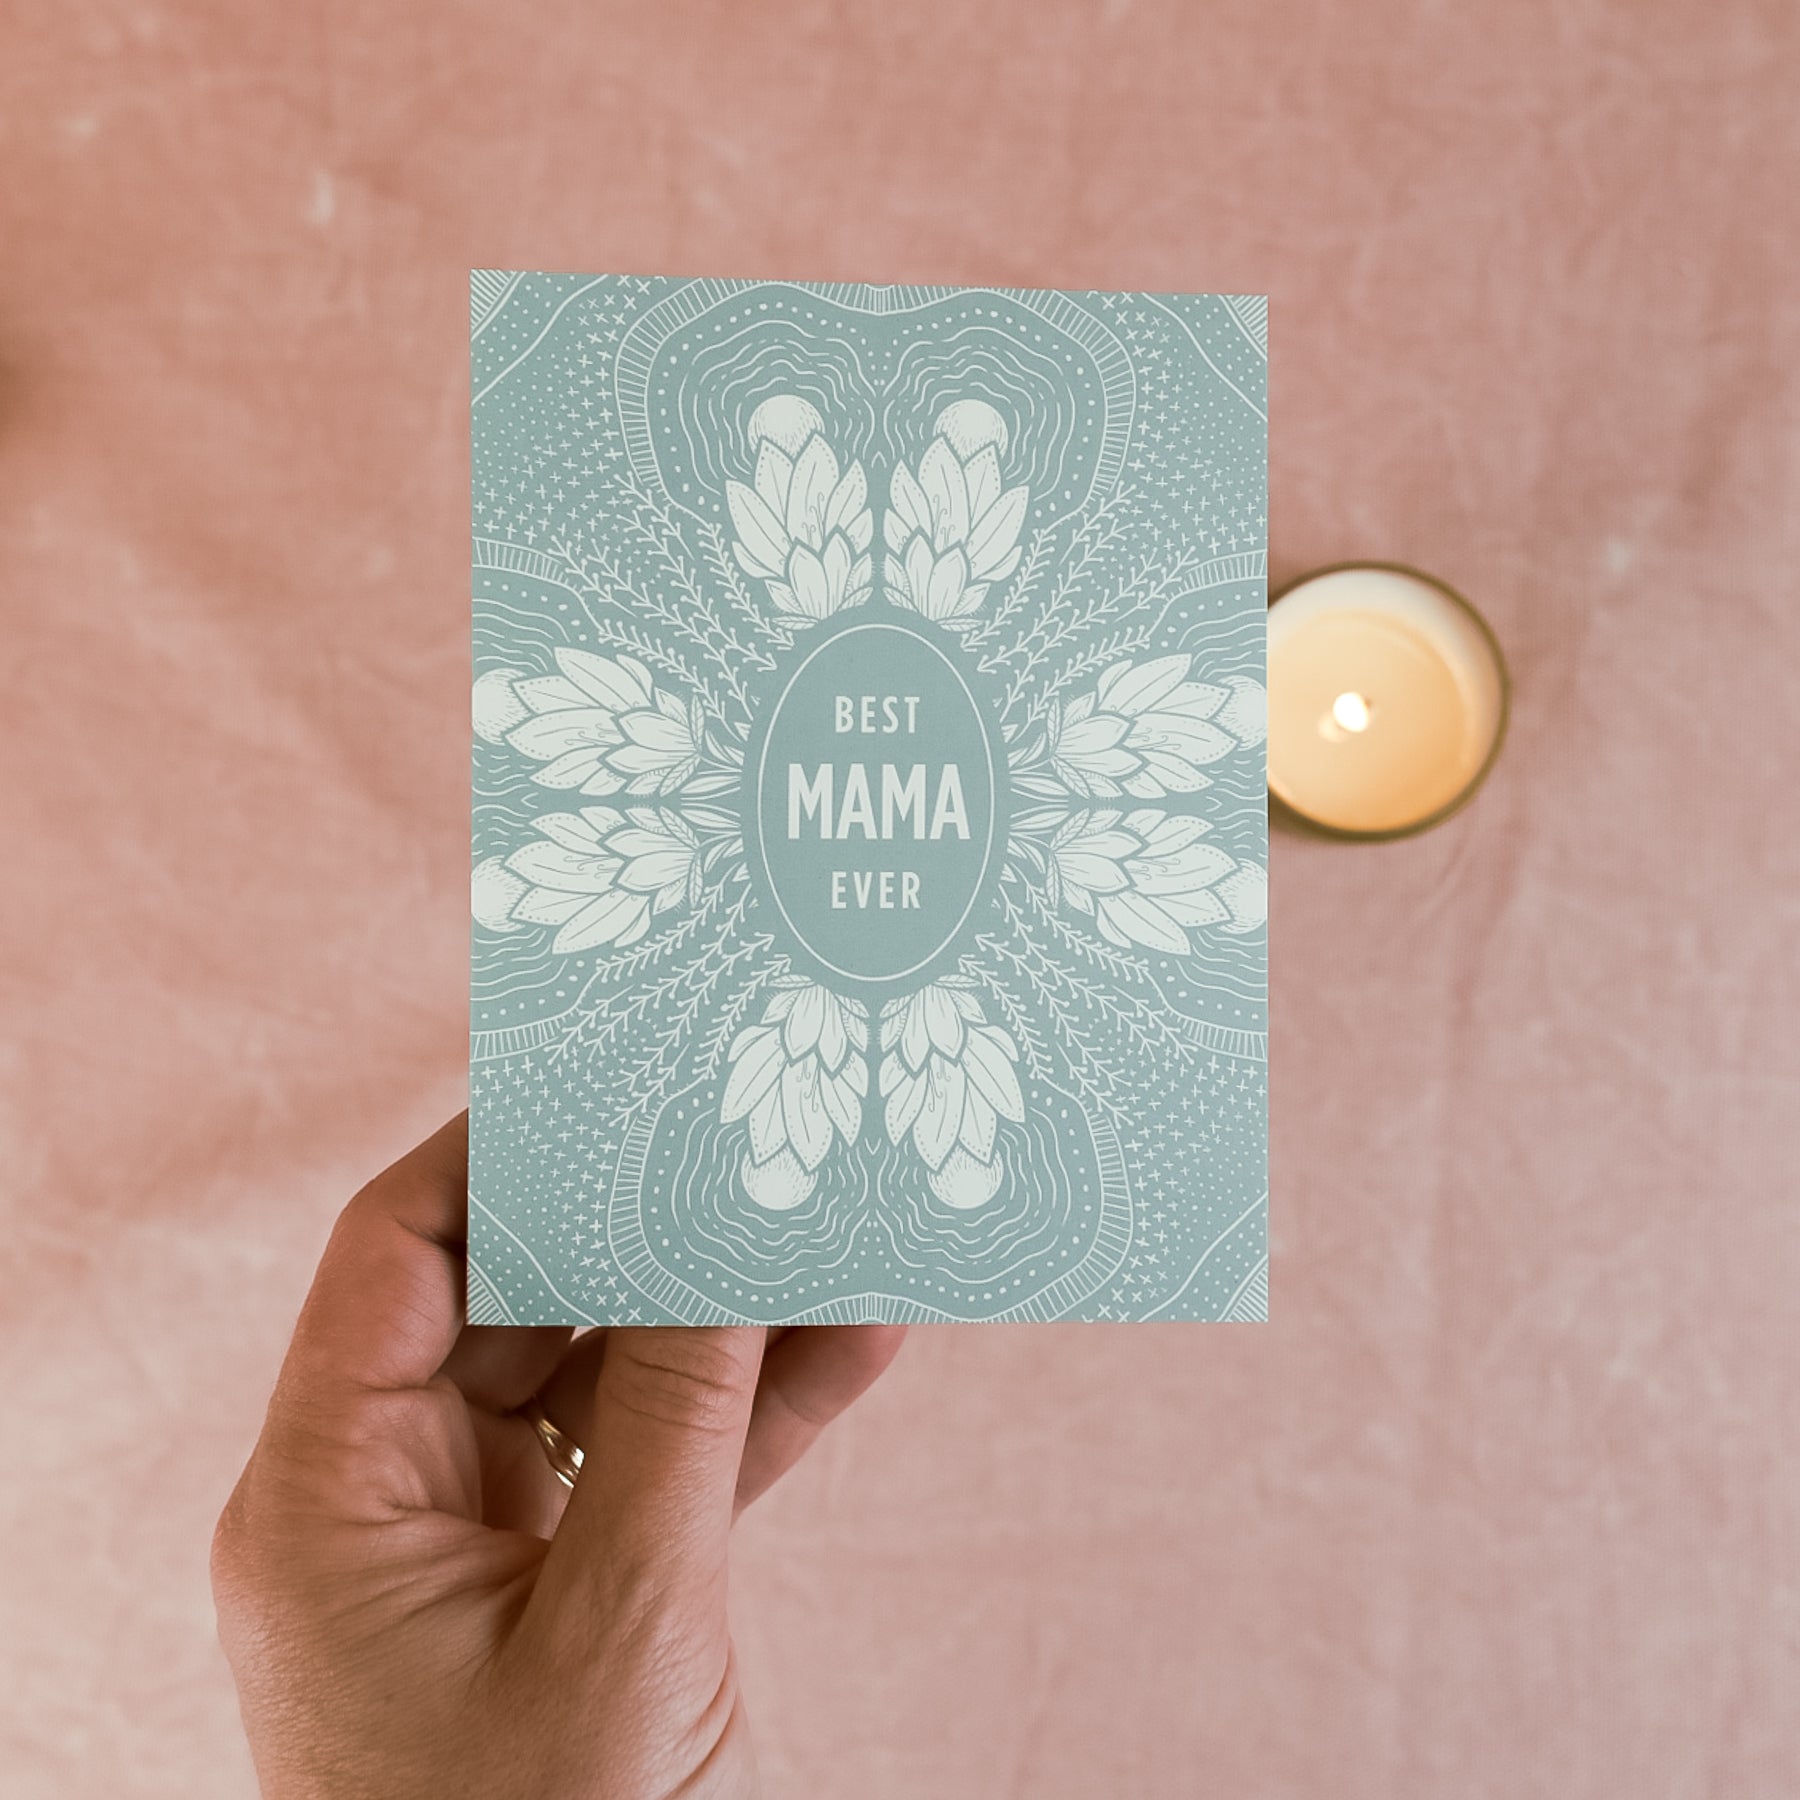 Sea-foam green with floral design Hand drawn 4.25" x 5.5" print greeting card.  Best Mama Ever Card by Slow North